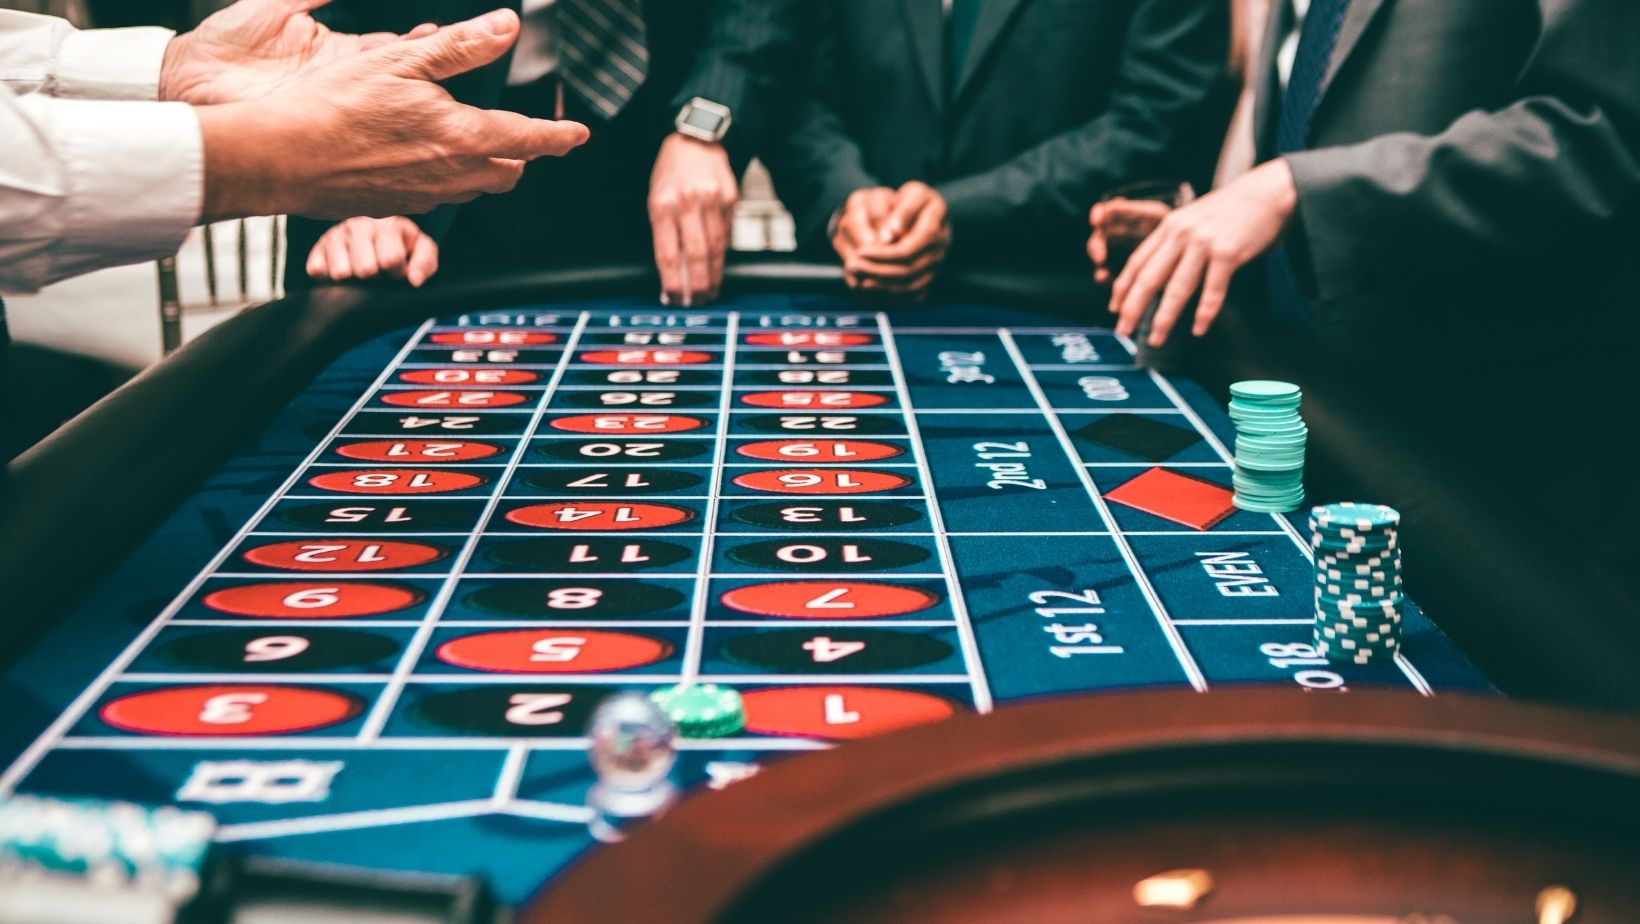 Fascinating Online Gambling Tactics That Can Help Your Business Grow